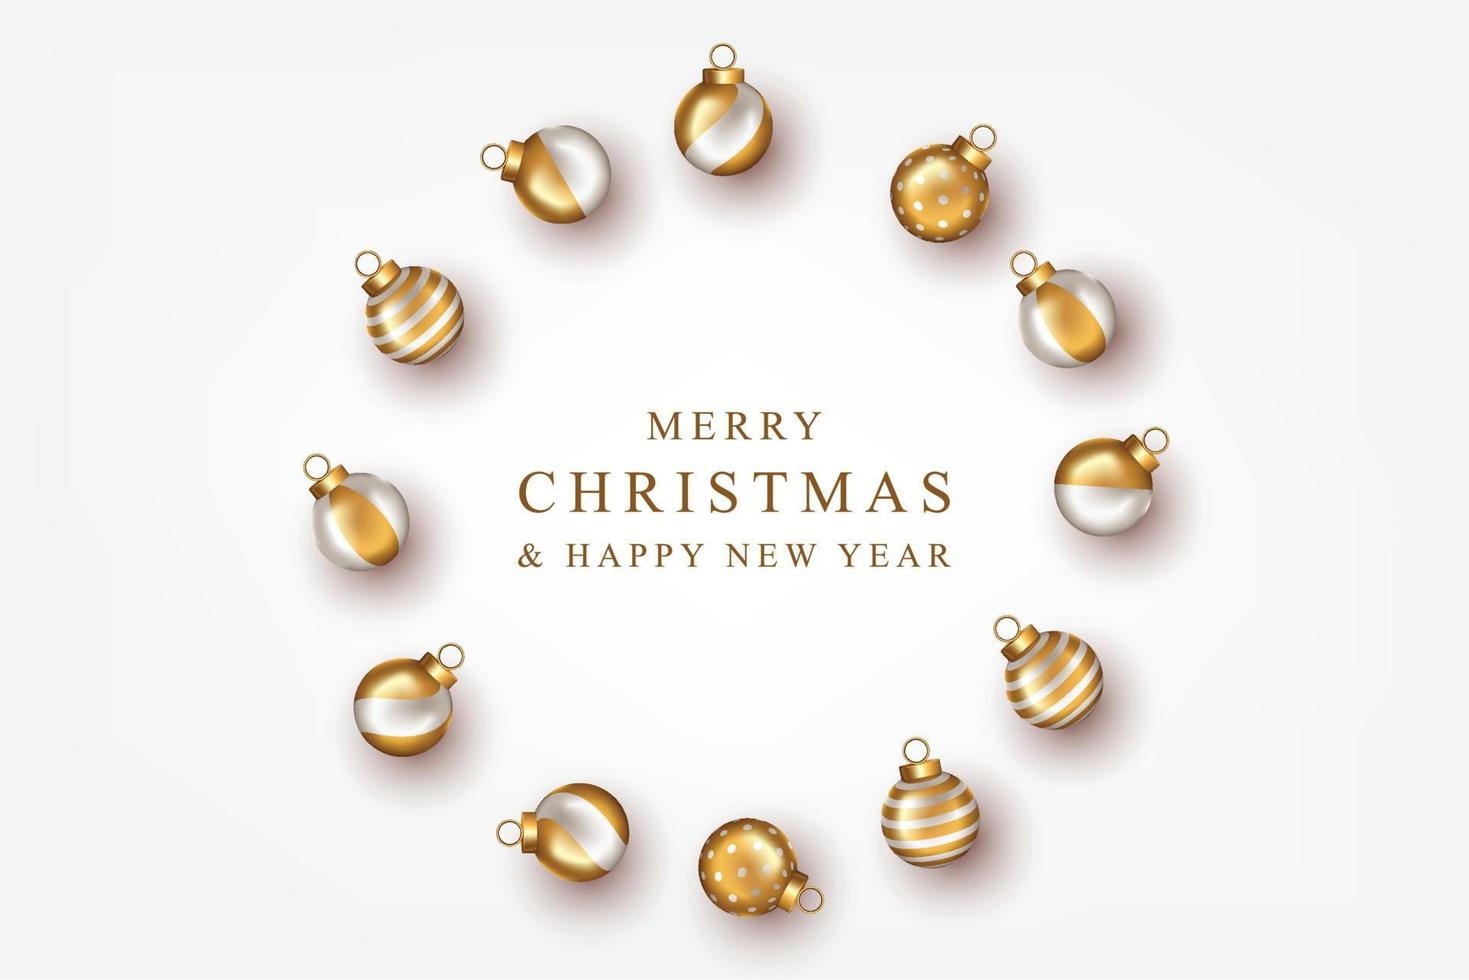 Merry Christmas and Happy New Year background with realistic golden and white decorative balls vector